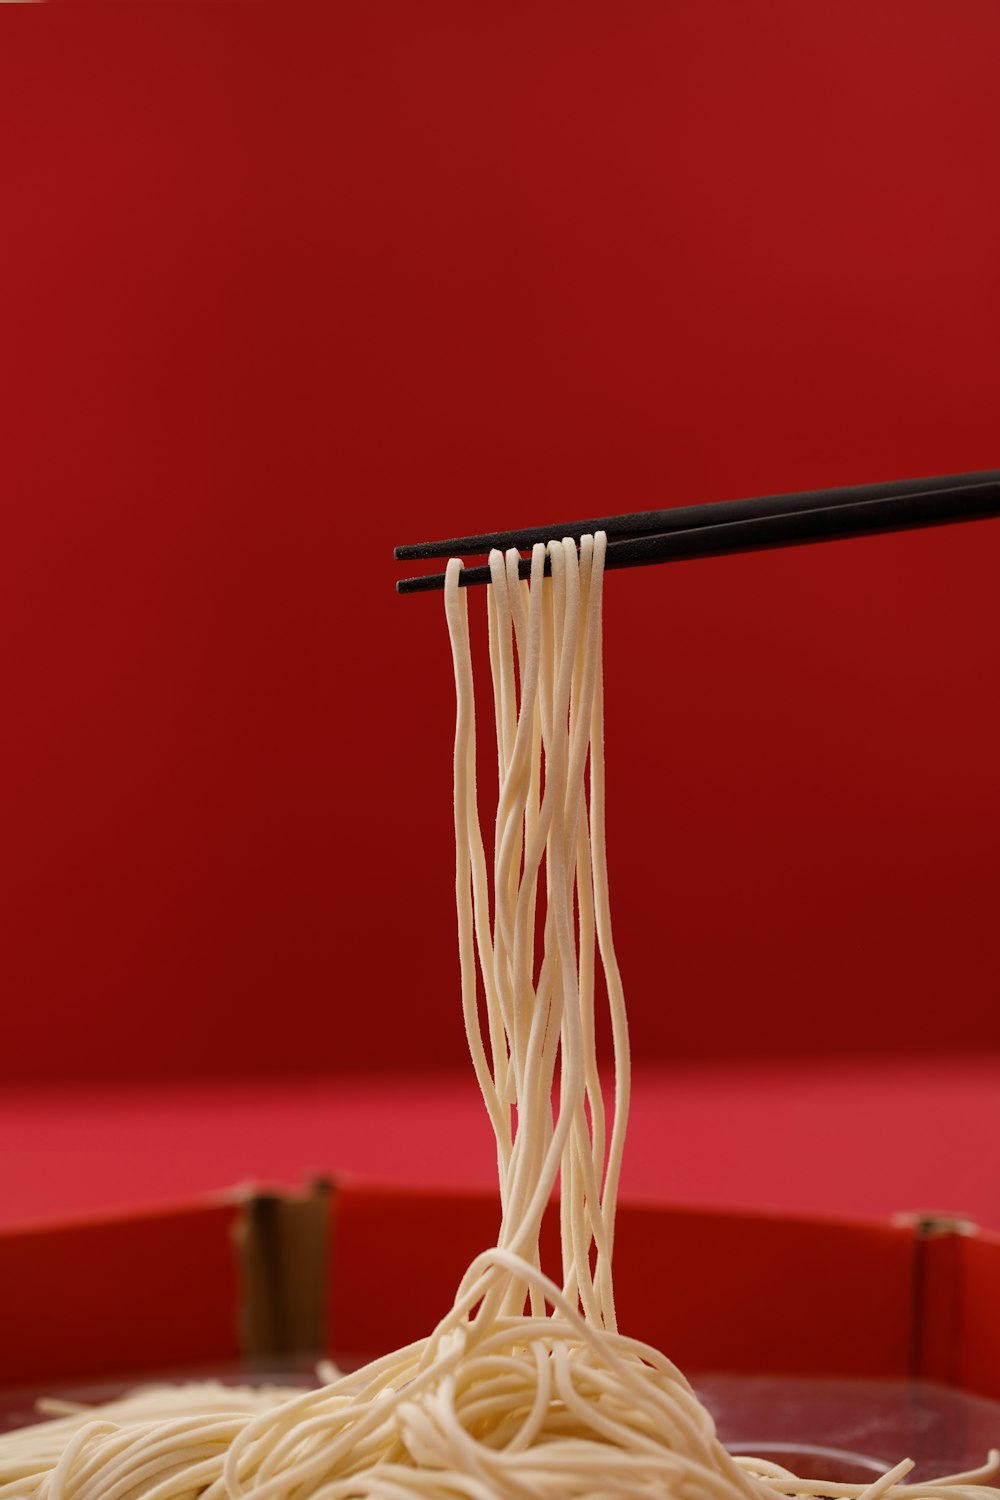 a bowl of noodles with chopsticks sticking out of it